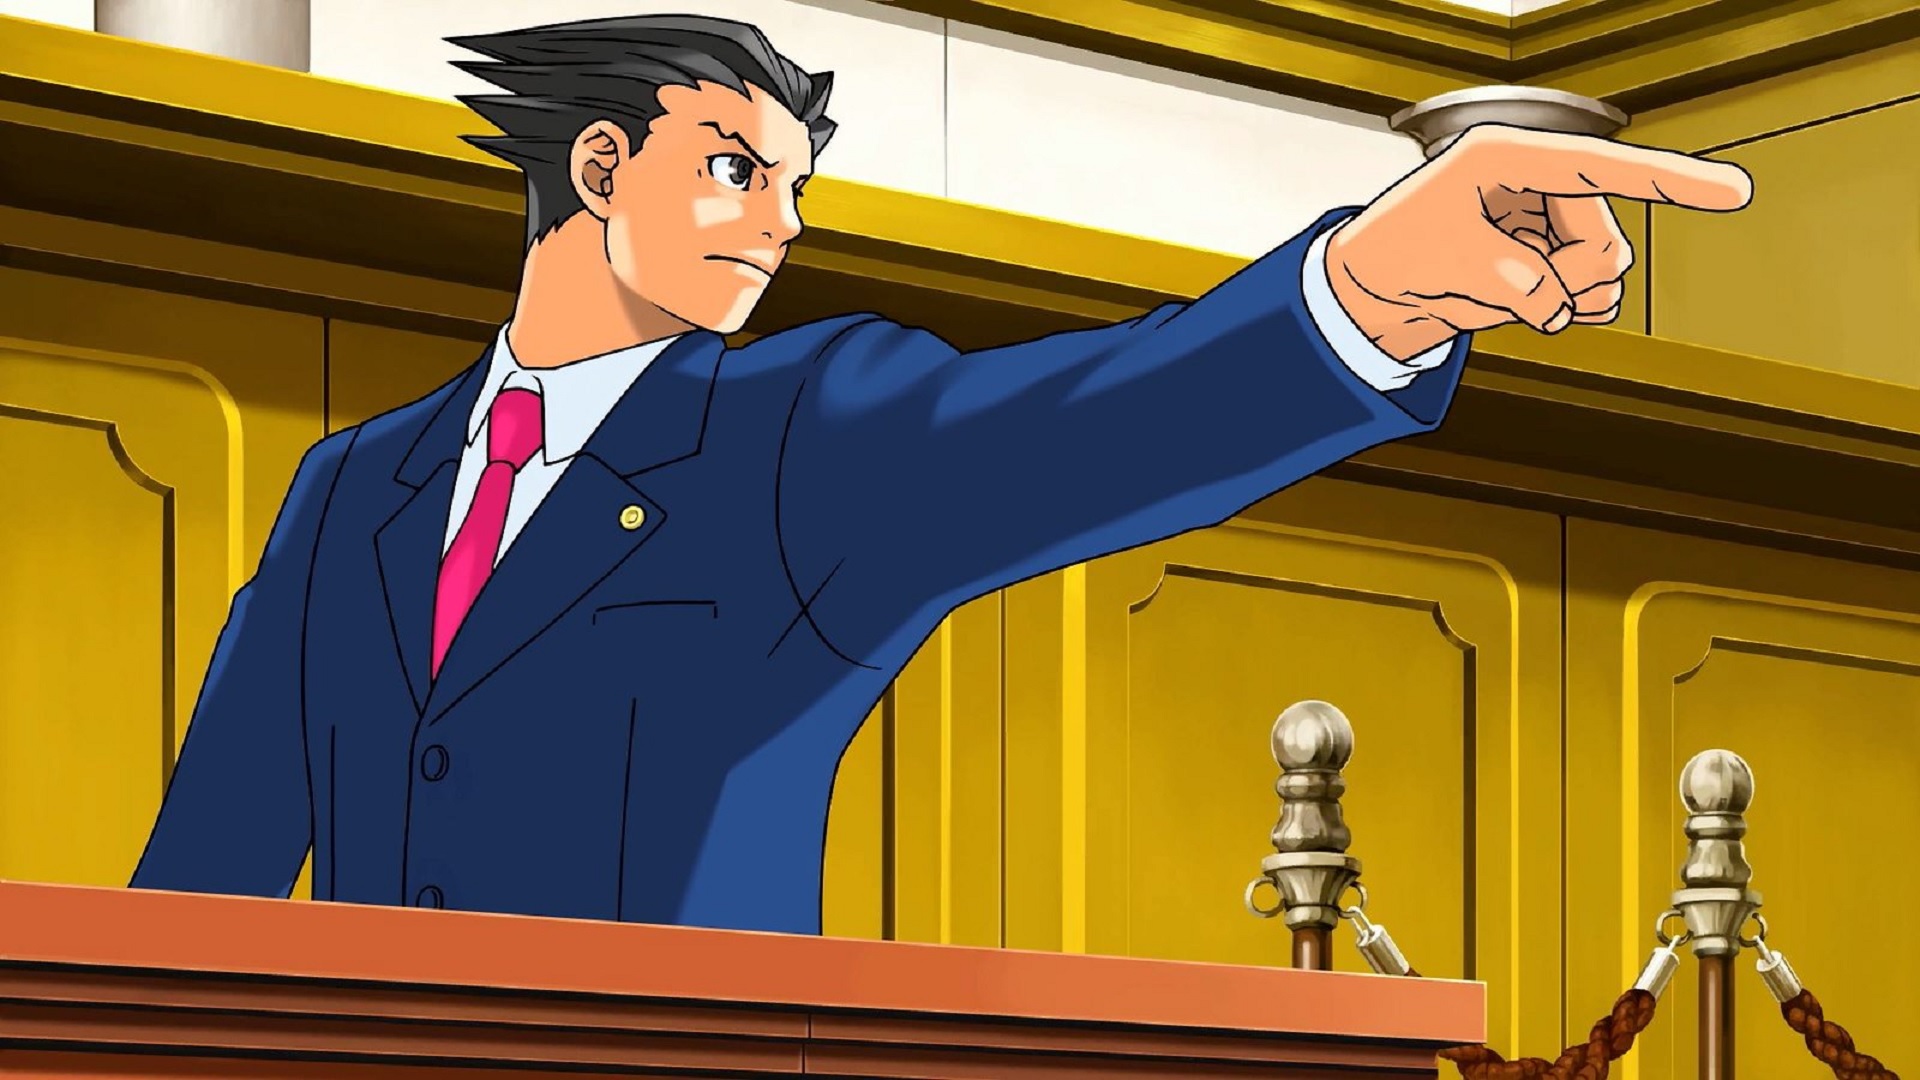  Ace Attorney trilogy. Image shows Phoenix himself pointing across the courtroom.